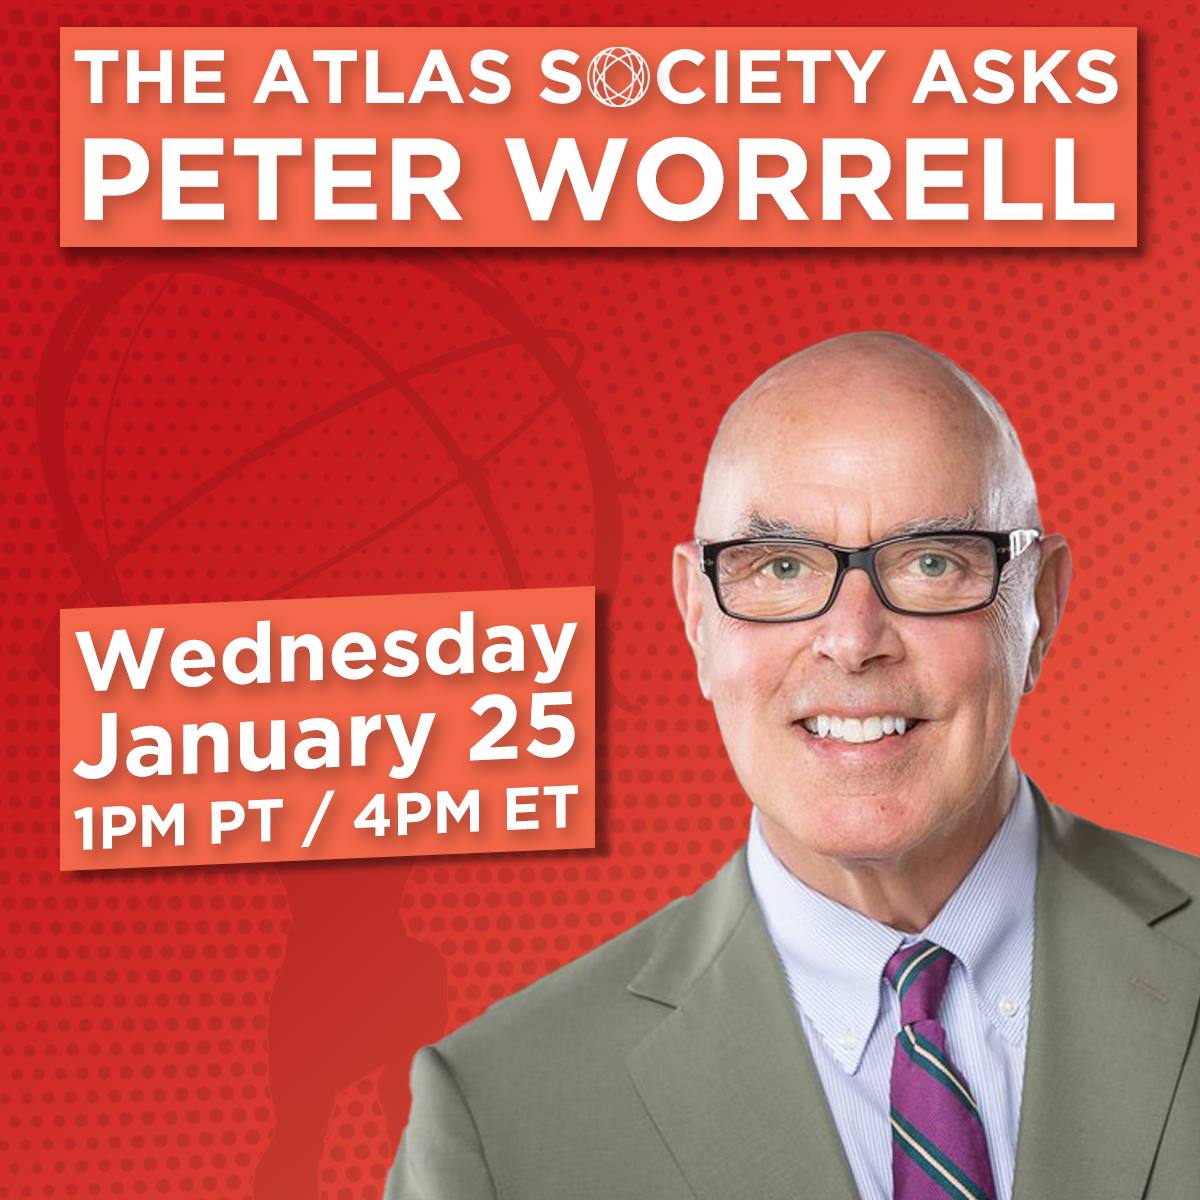 The Atlas Society Asks Peter Worrell